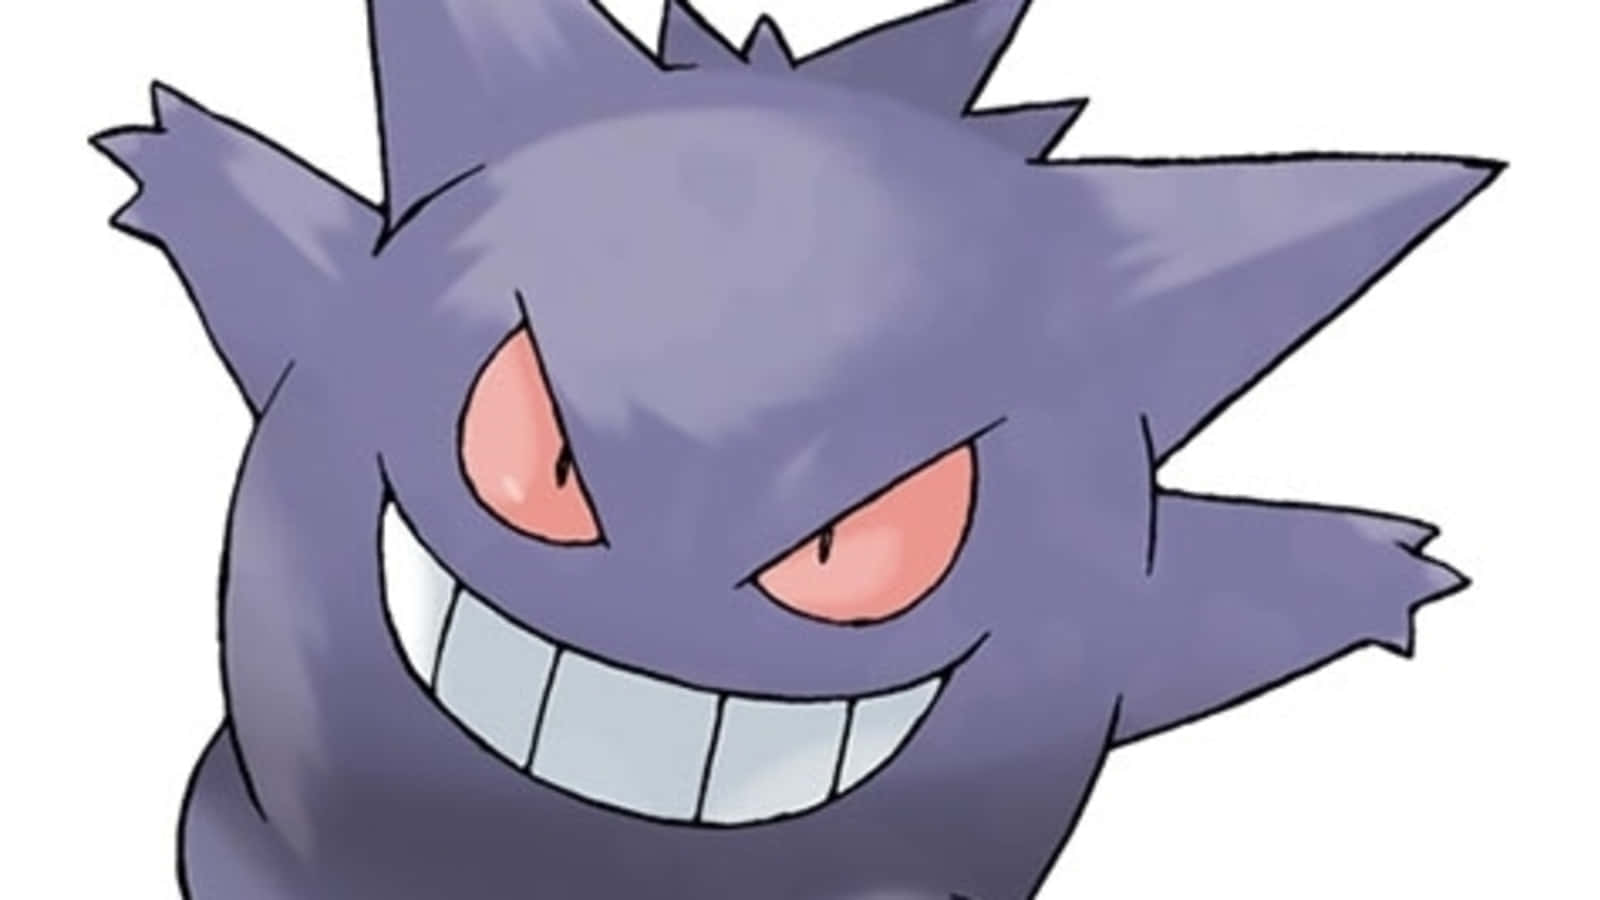 A Purple Pokemon With Red Eyes And A Big Mouth